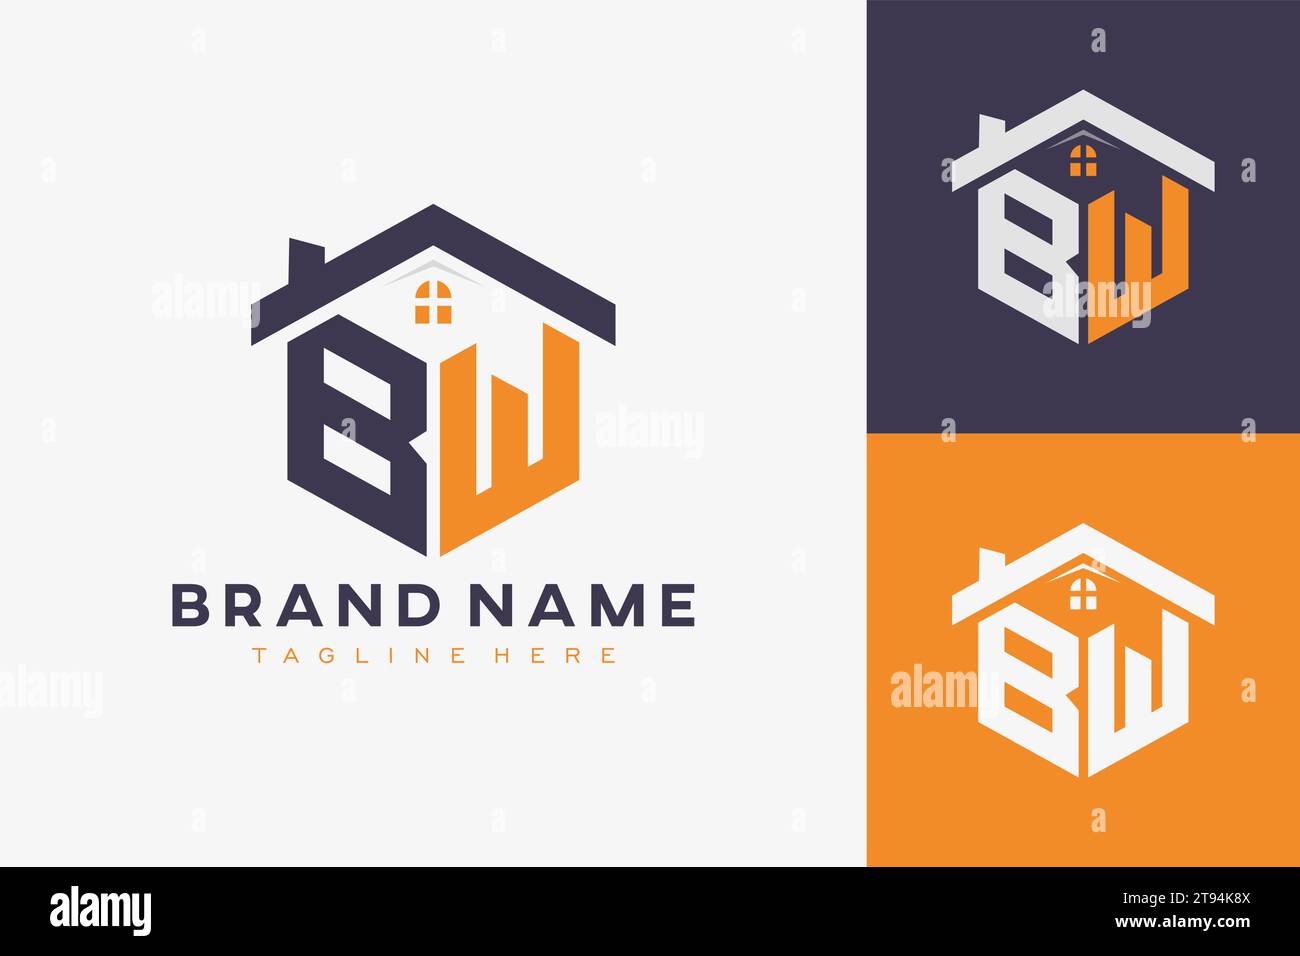 hexagon BW house monogram logo for real estate, property, construction business identity. box shaped home initiral with fav icons vector graphic templ Stock Vector